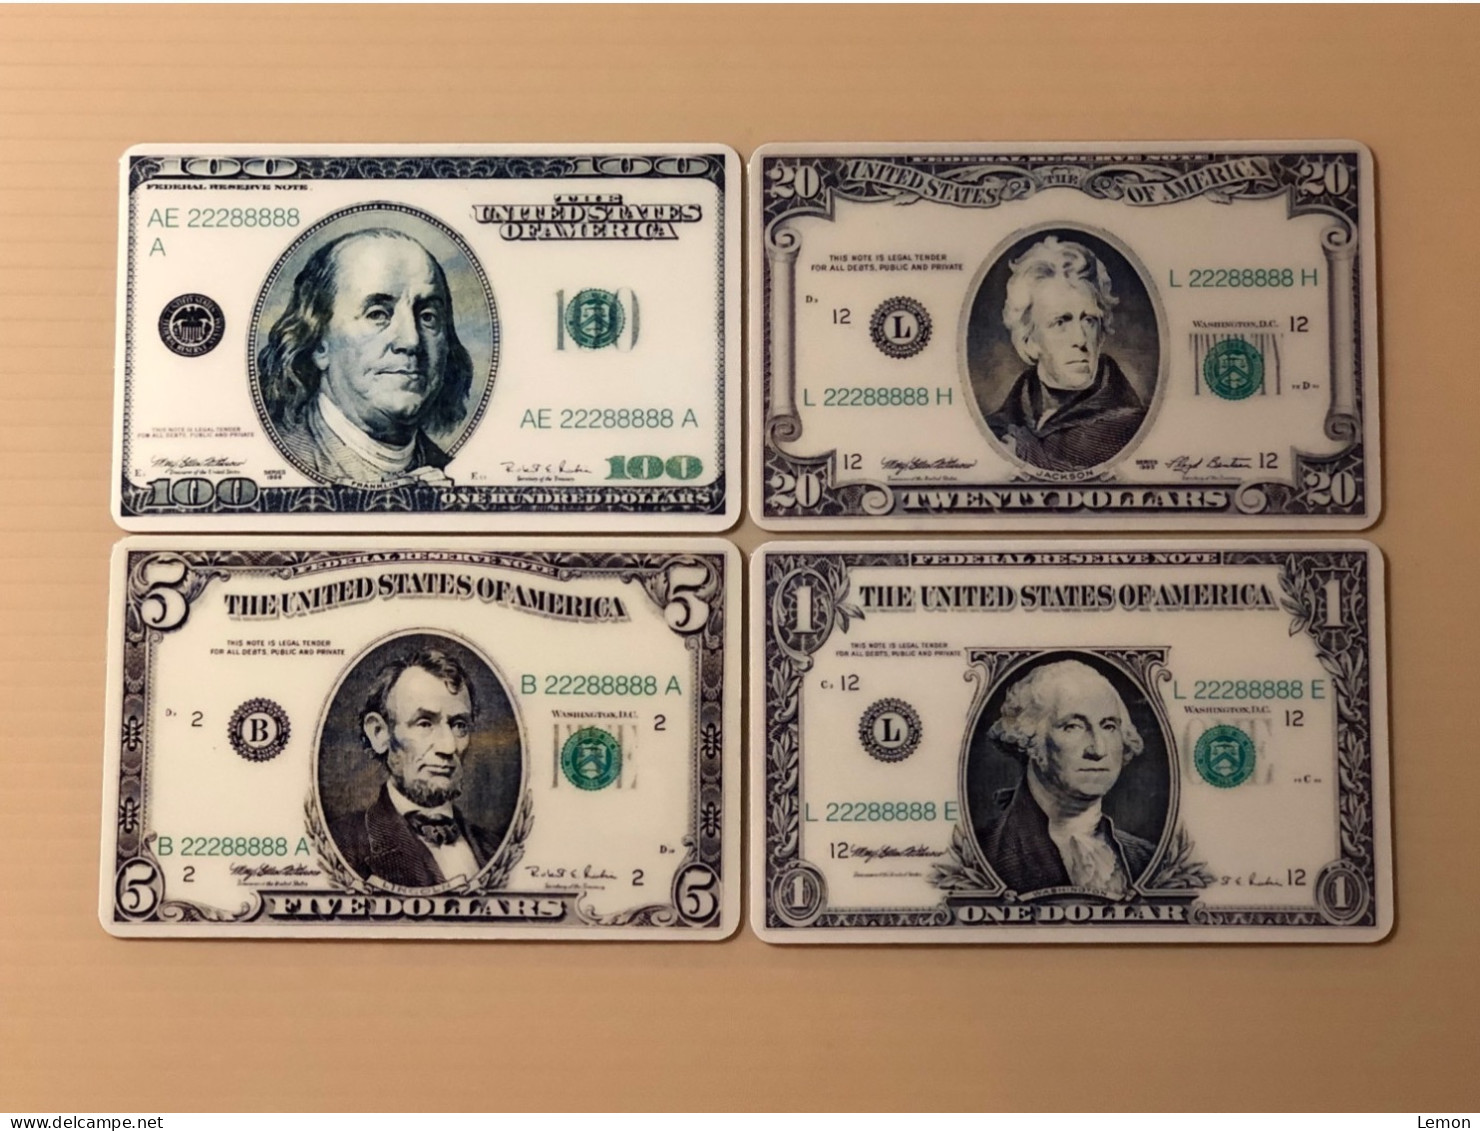 Mint USA UNITED STATES America Prepaid Telecard Phonecard, US Banknote Dollar Currency, Set Of 4 Mint Cards - Sammlungen